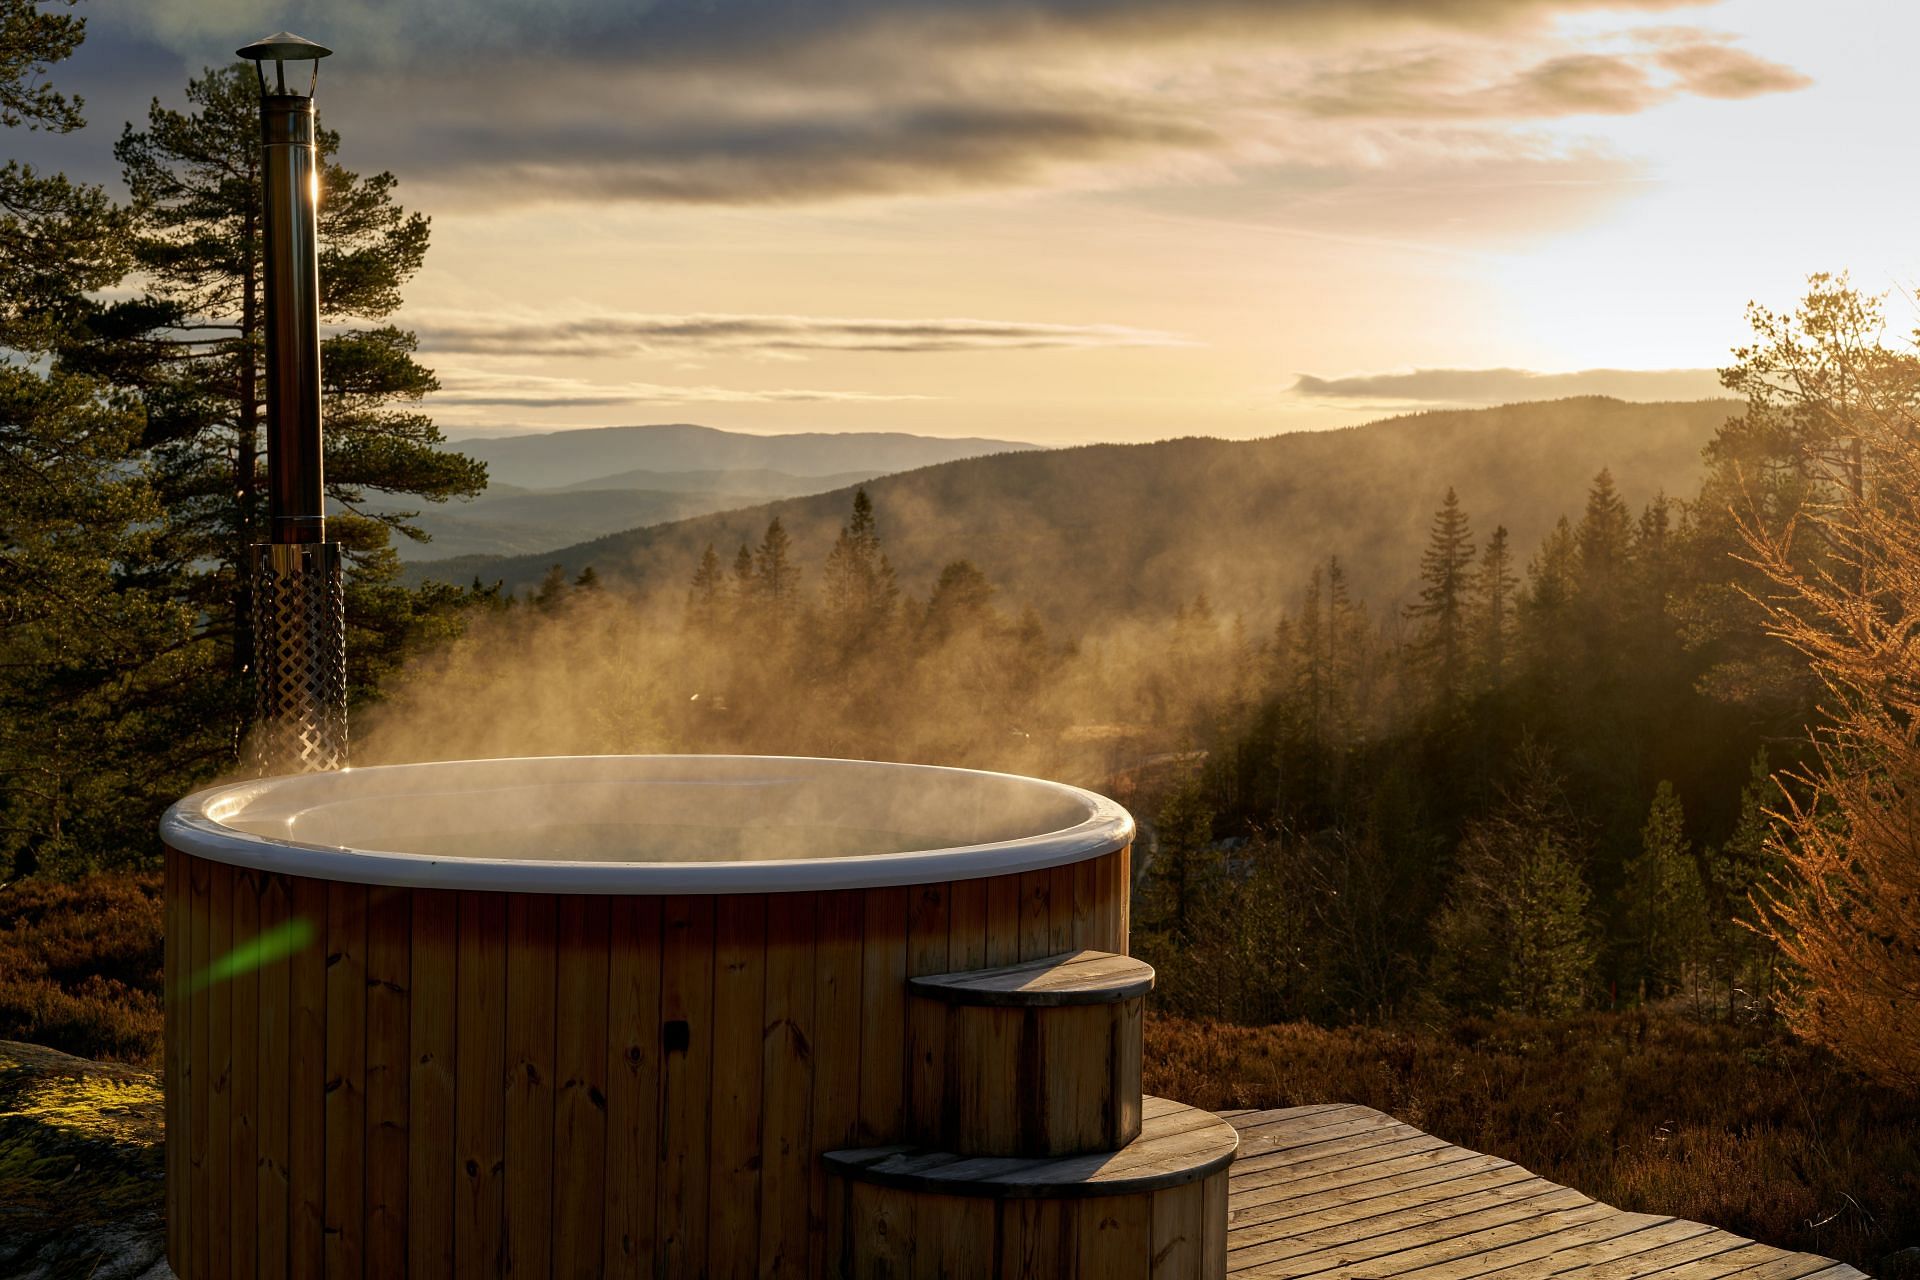 Hot tub health benefits (image sourced via Pexels / Photo by barnabas)